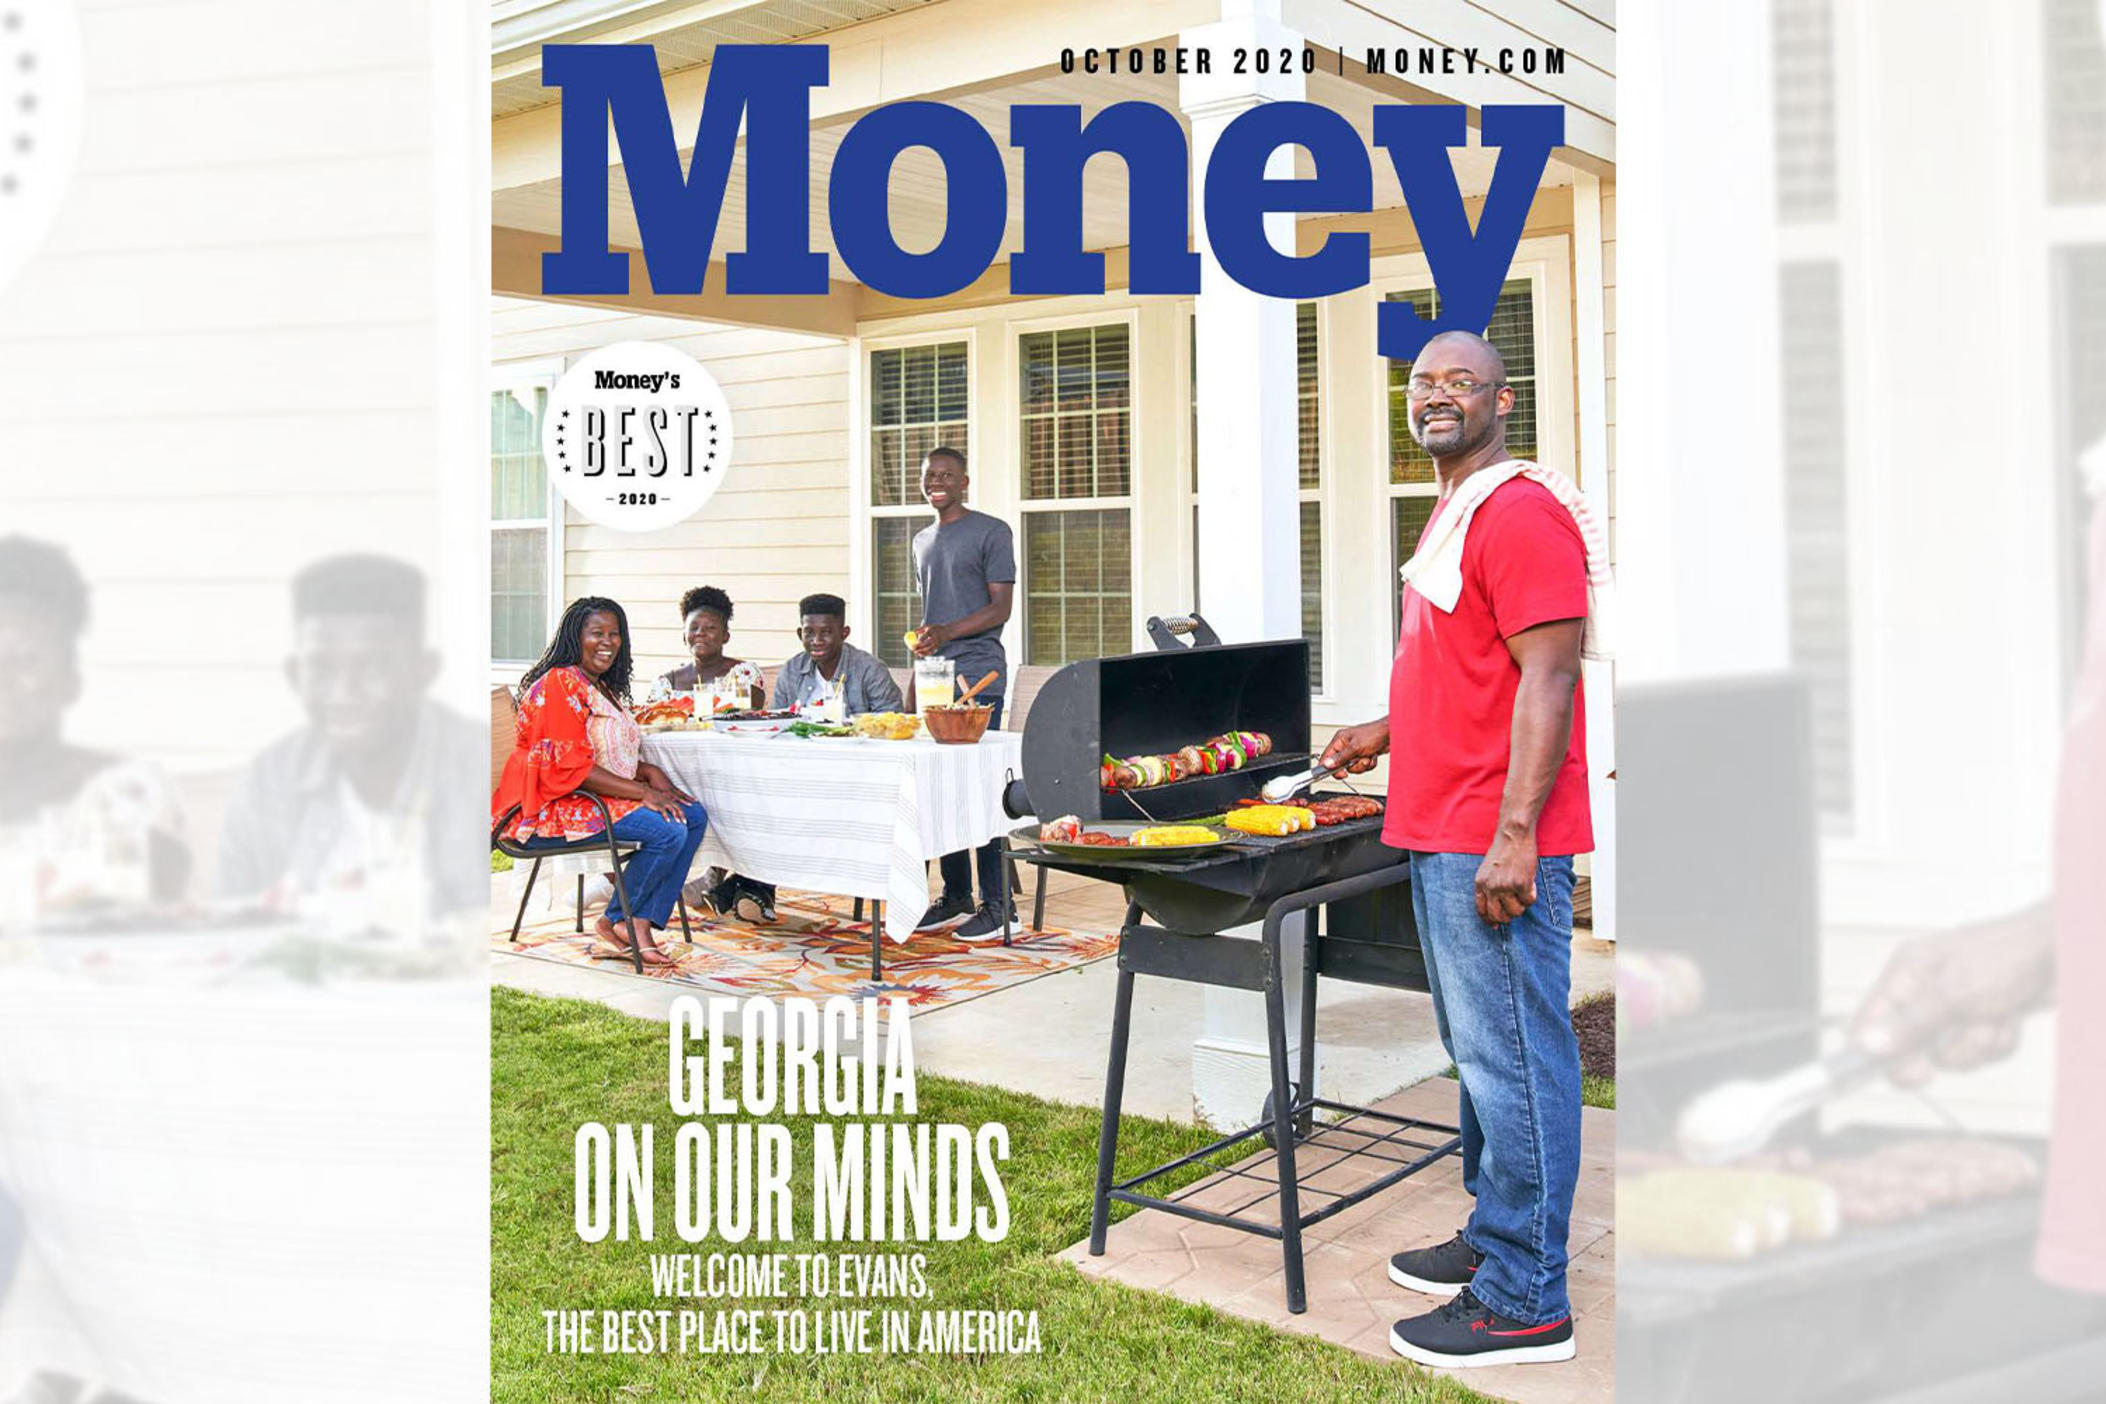 Money Magazine named Evans, Ga., the "Best Place to Live in America" in their most recent issue.